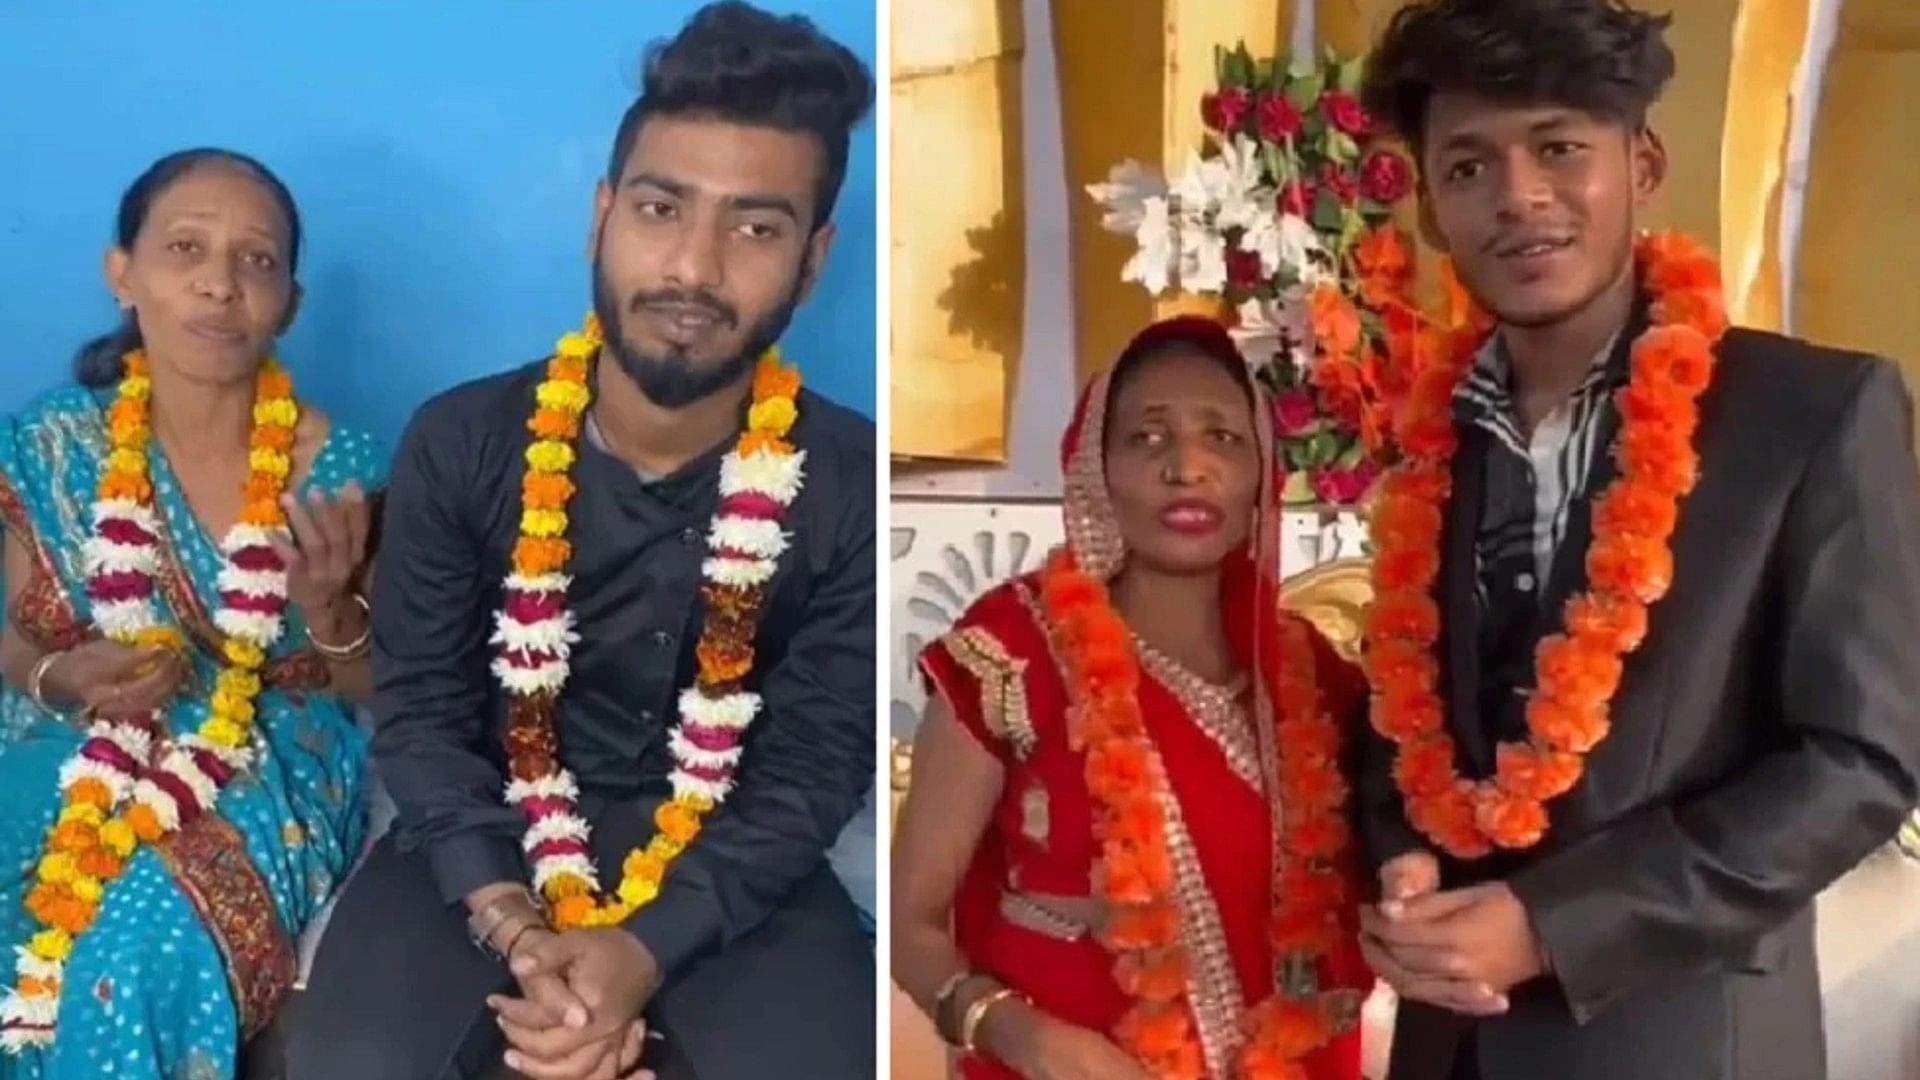 52 year old woman doing fake weddings with young boys for getting footage